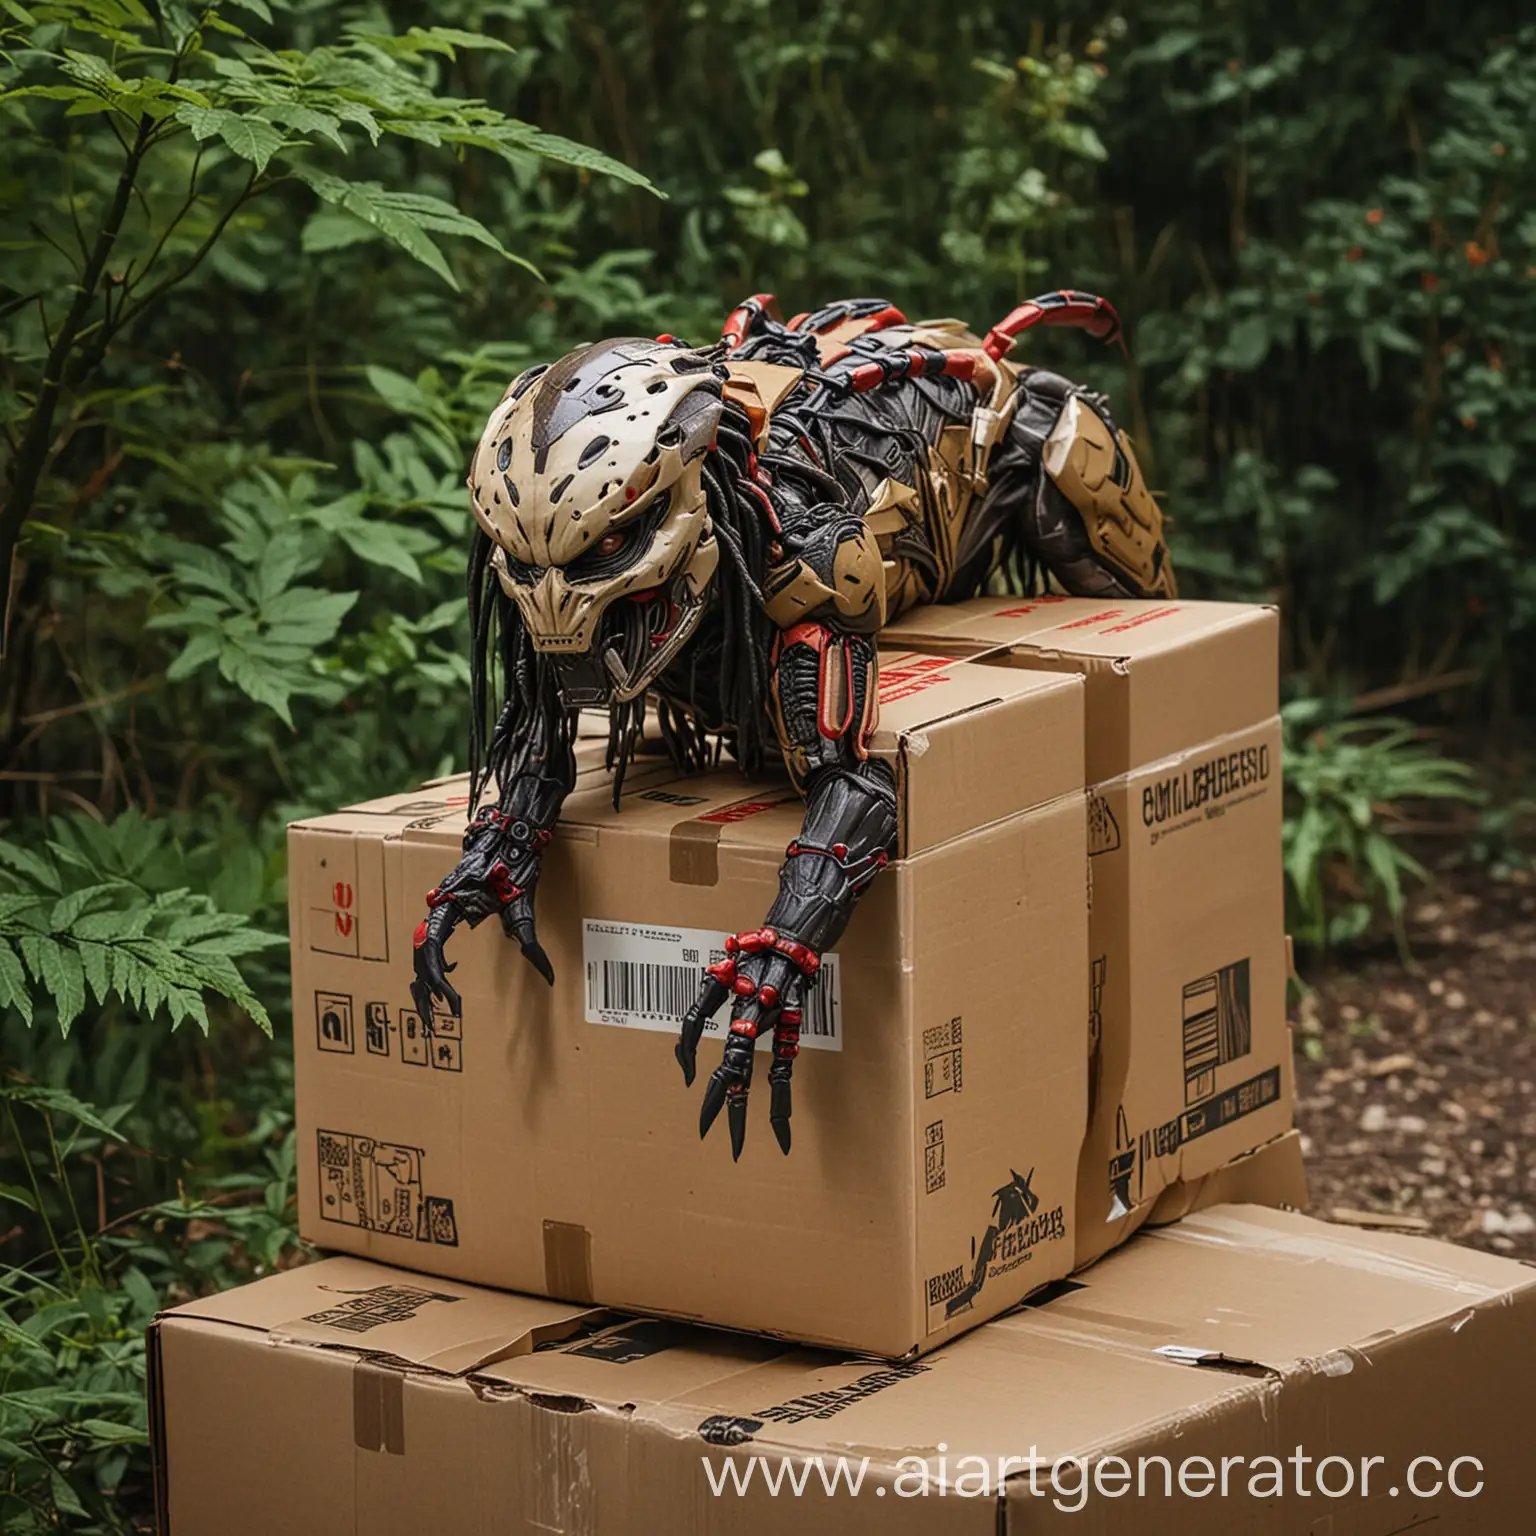 Predator-Packing-Parcel-from-Belpackimport-Wildberries-Courier-Service